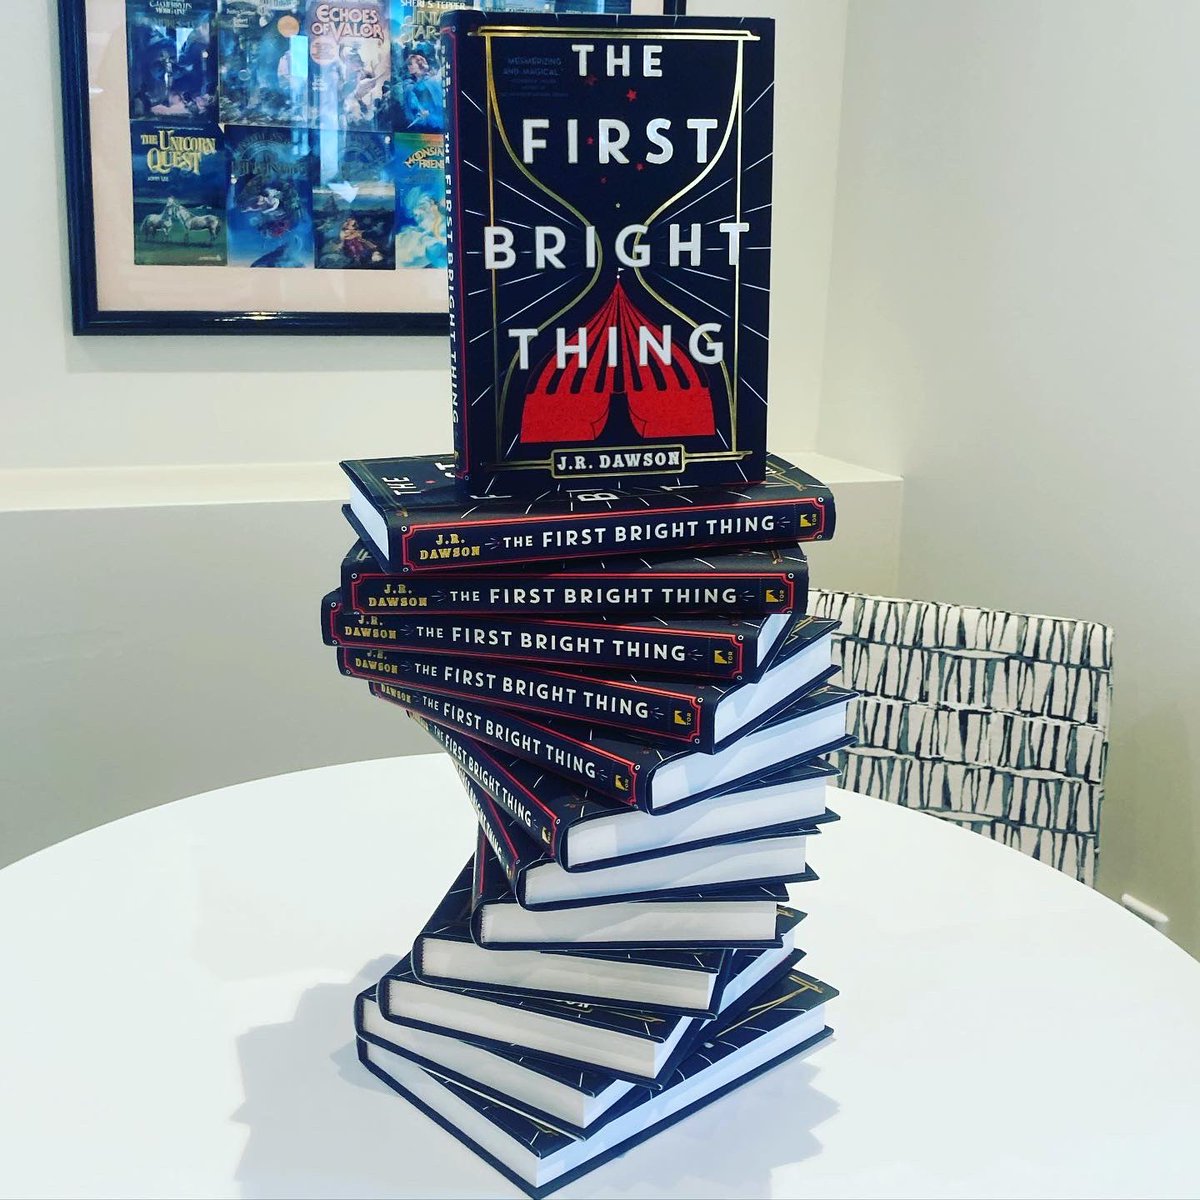 At the end of my national tour, I got to visit the @torbooks offices and meet the team. It was such a wonderful time. And yes I am proudly Team Orc! #thefirstbrightthing #sparkwonder